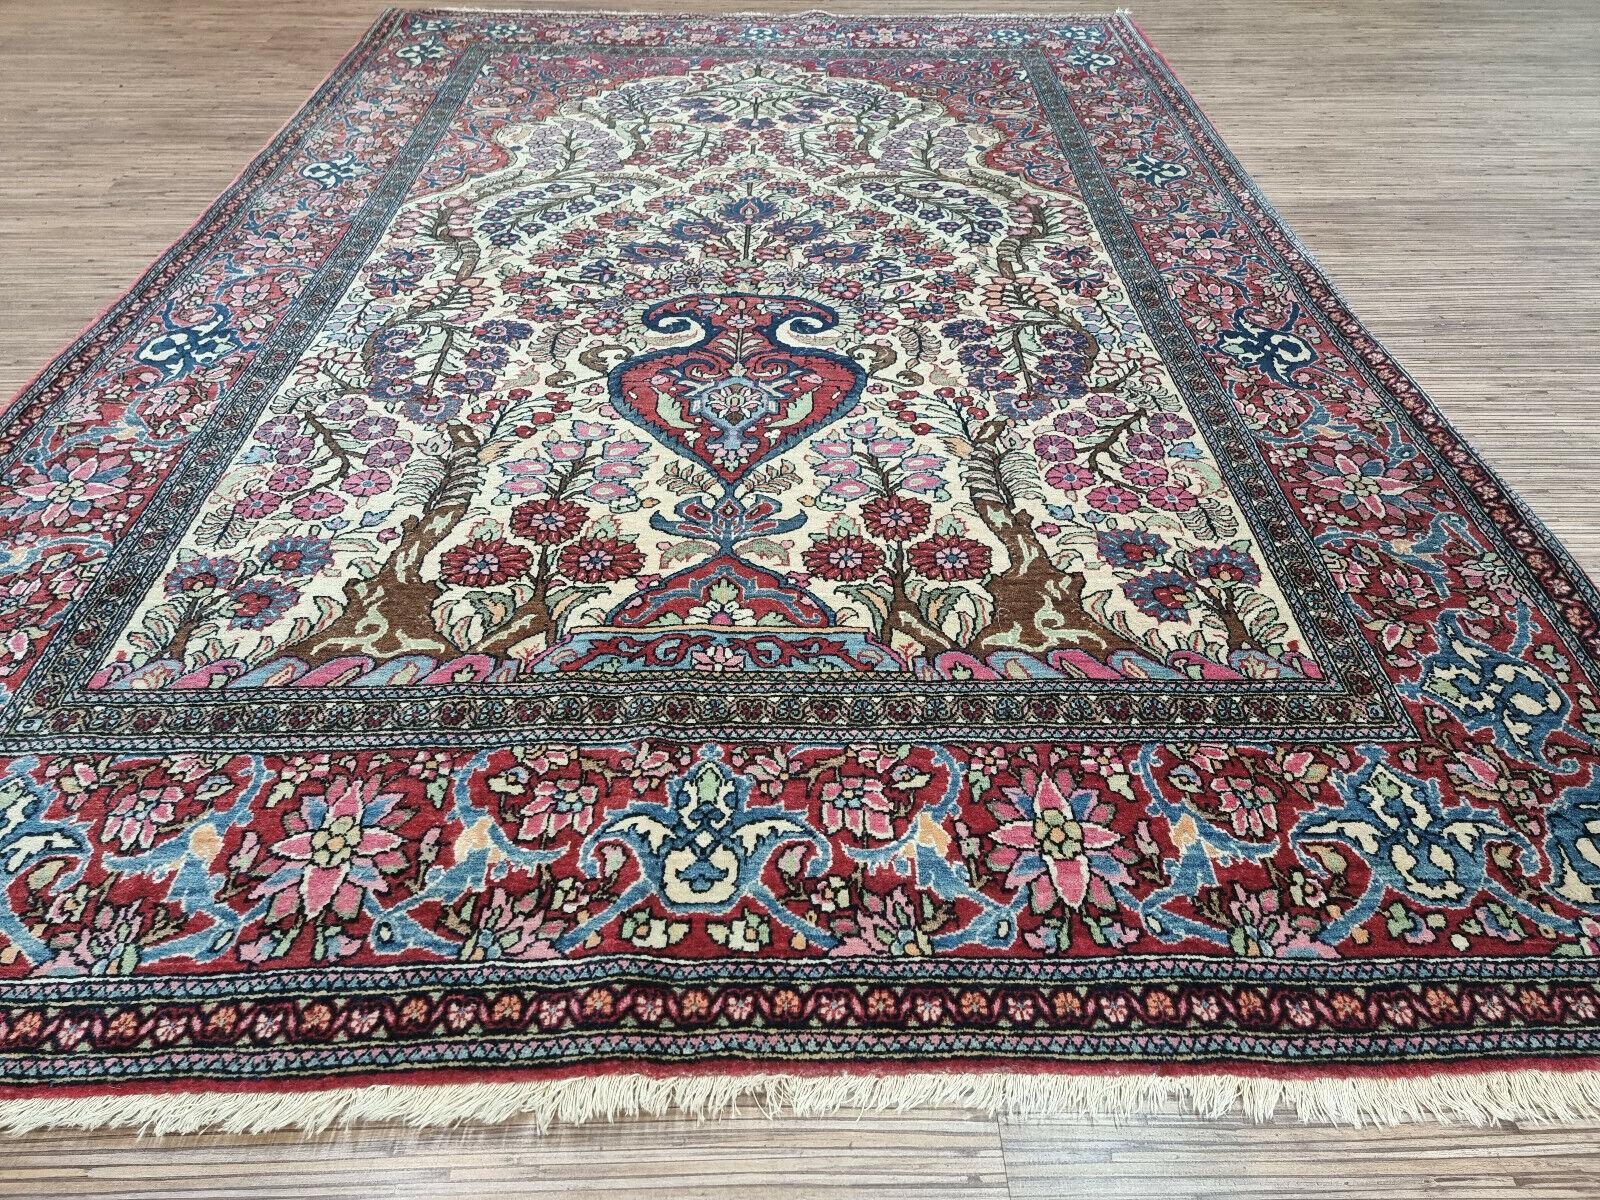 Hand-Knotted Handmade Antique Persian Style Isfahan Prayer Rug 4.6' x 6.8', 1900s - 1D85 For Sale